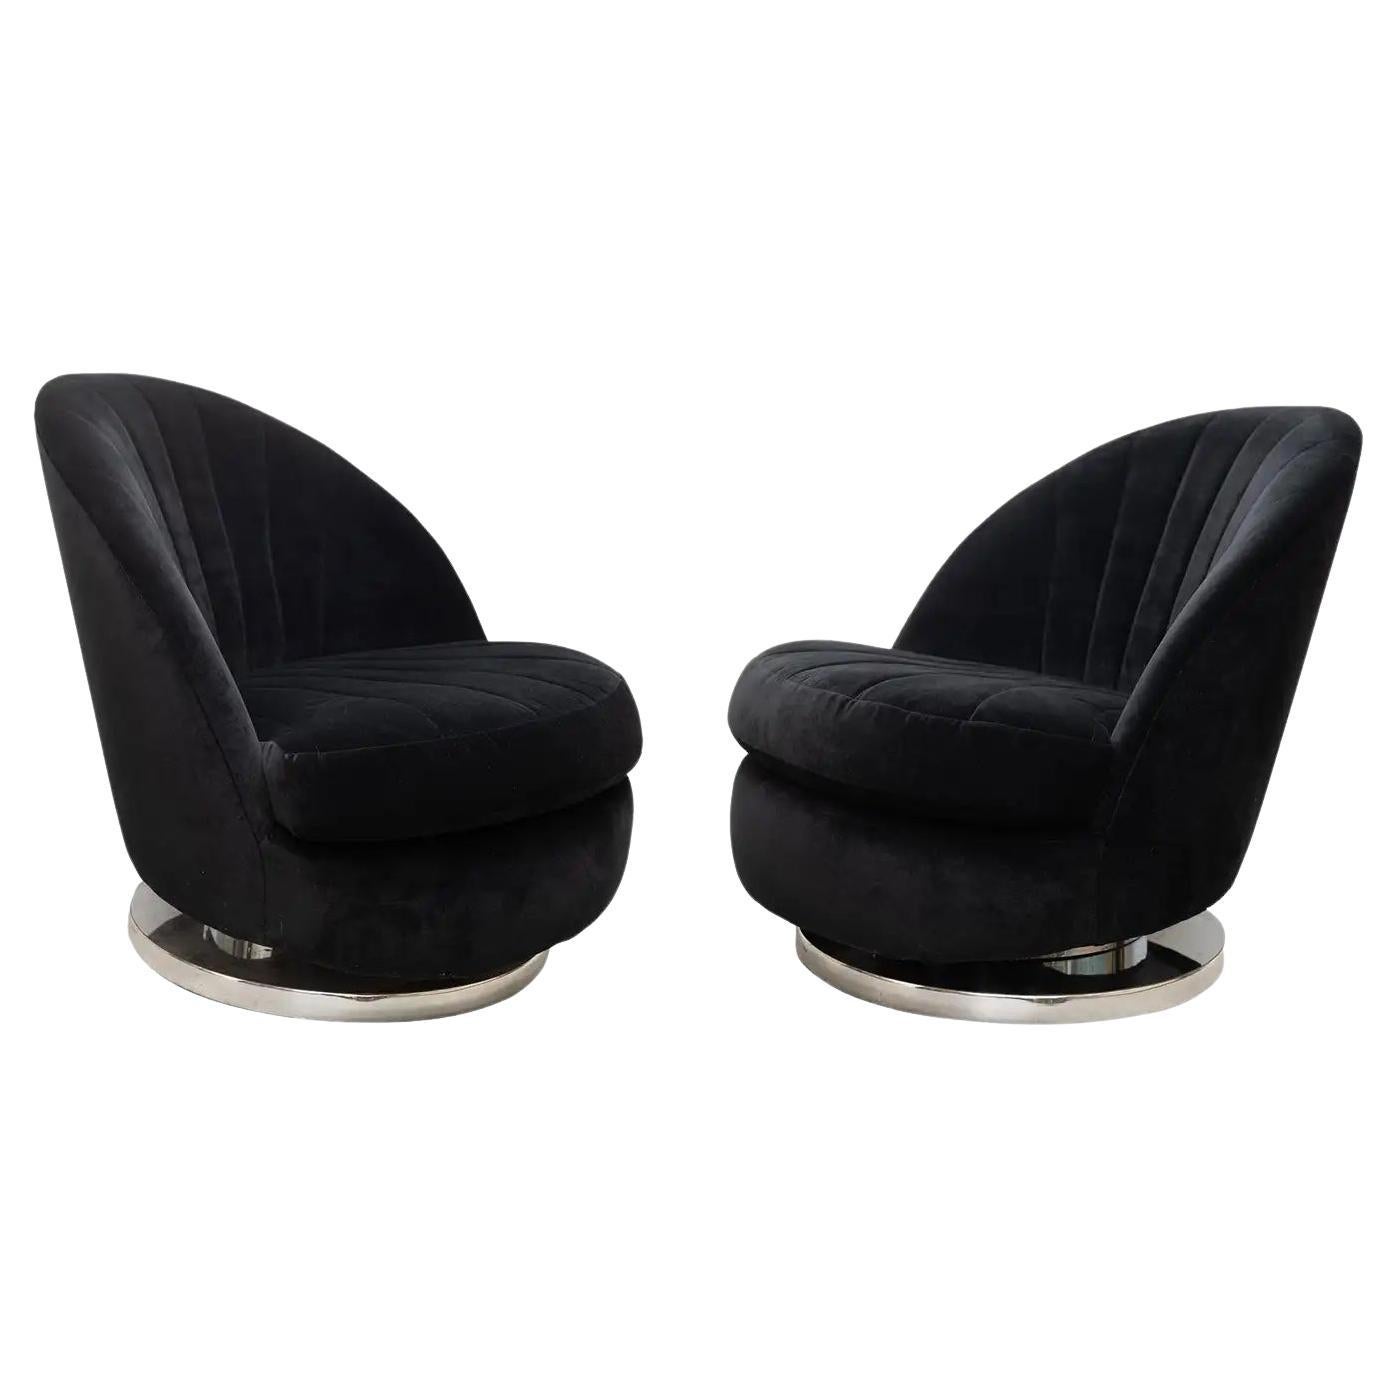 Pair Iconic Milo Baughman Swivel and Tilt Lounge Chairs in Black, Ca. 1975 For Sale